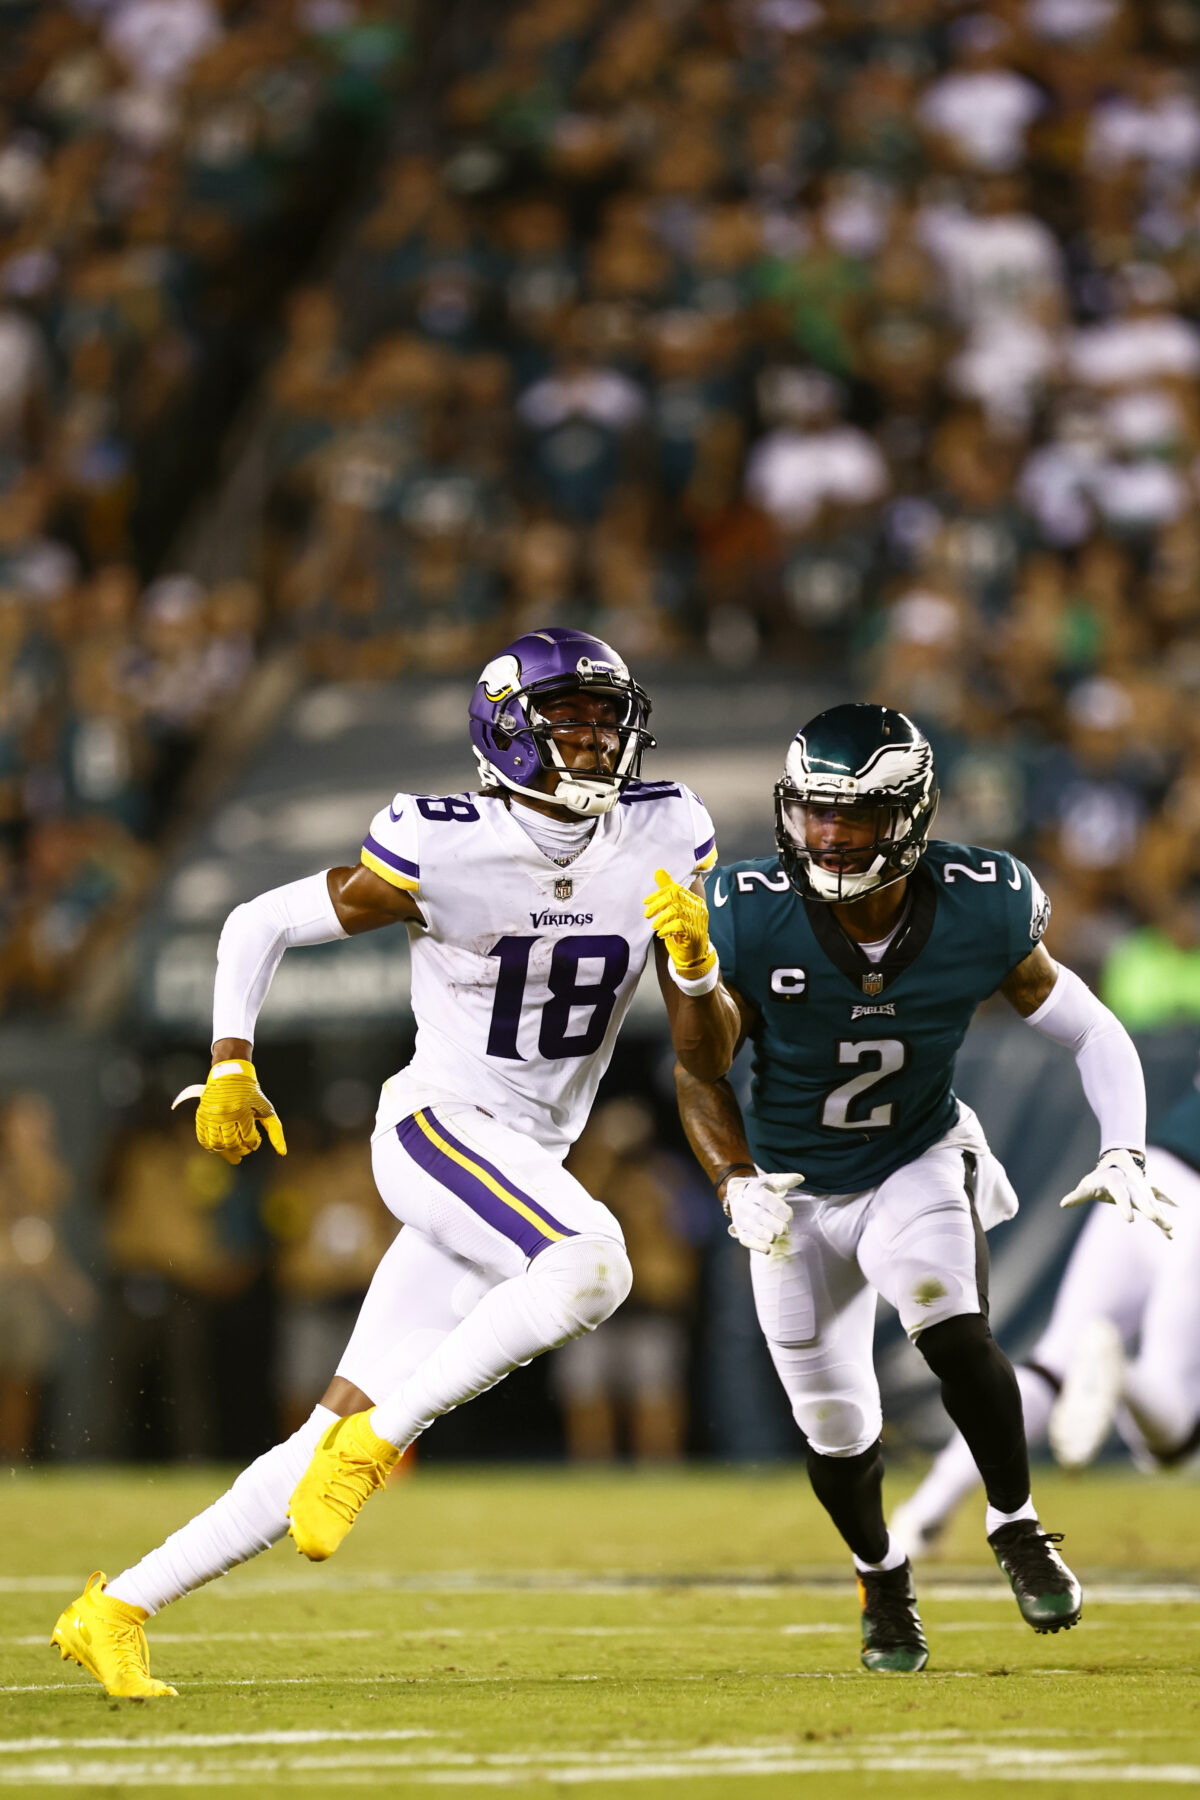 Best photos from Eagles 24-7 win over the Vikings in Week 2